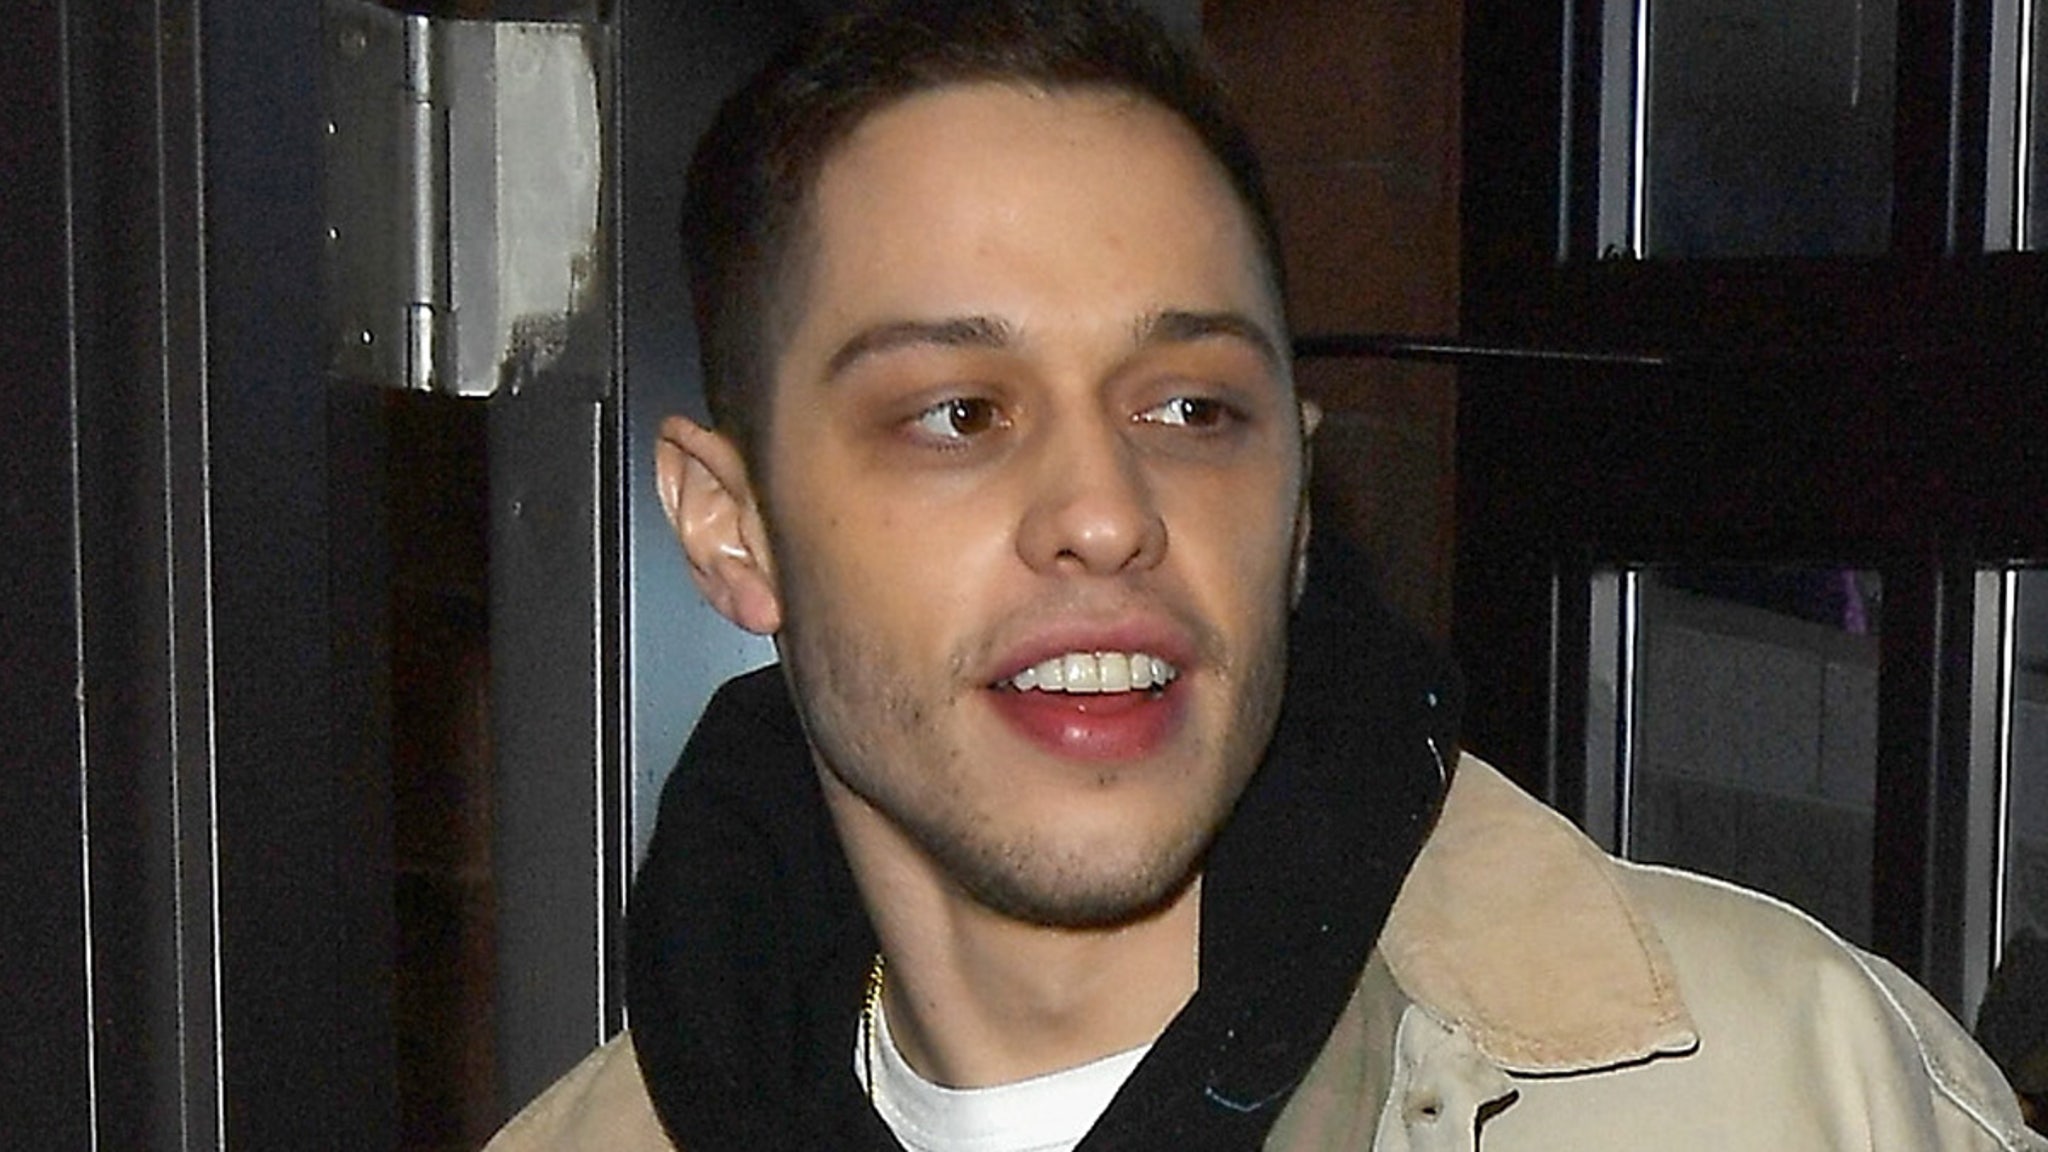 Pete Davidson is not actually married, despite the press release from Production Co.